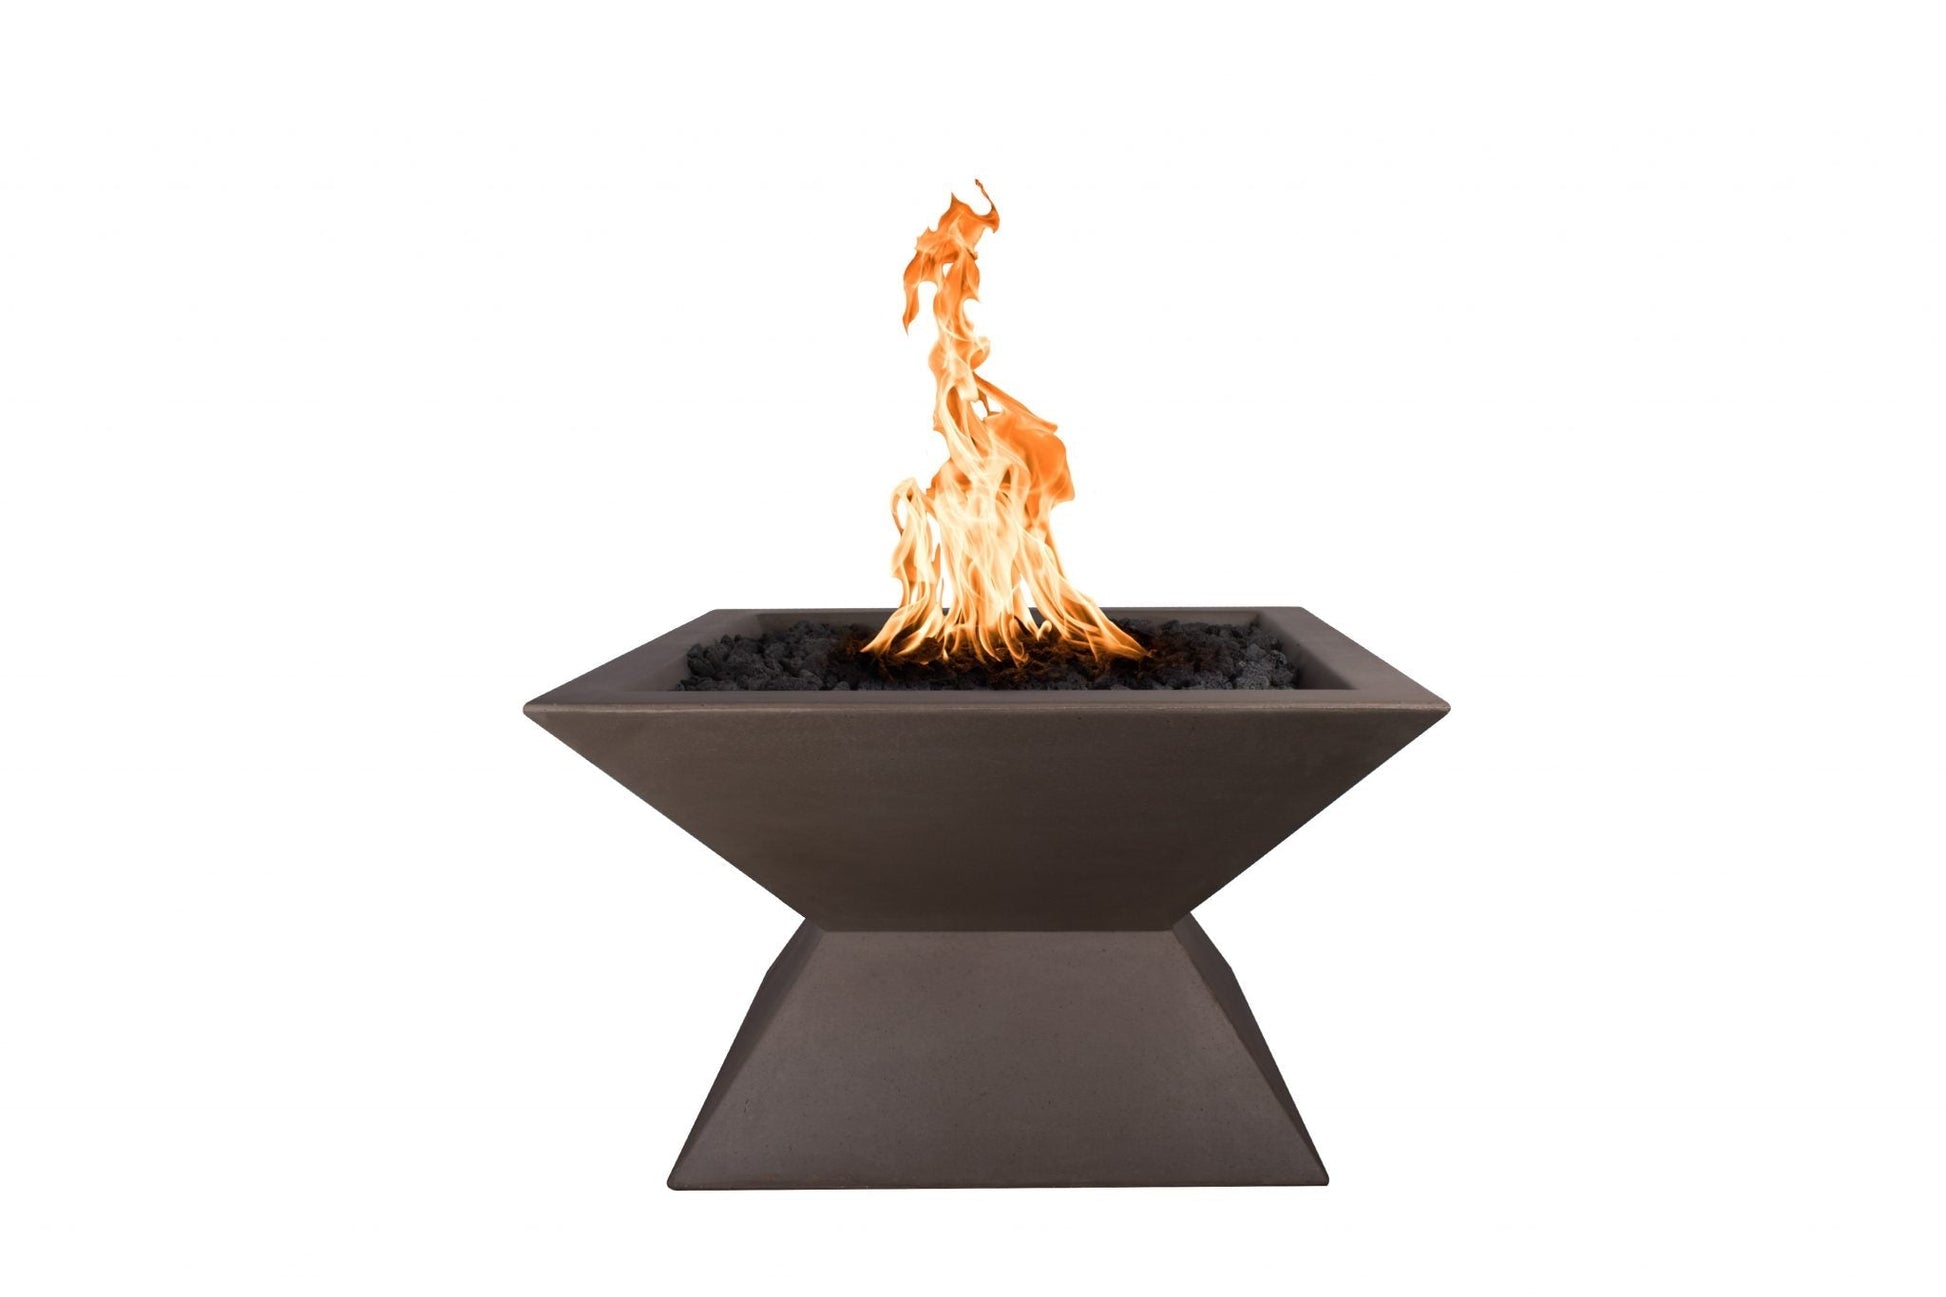 The Outdoor Plus Square Uxmal 30" Brown GFRC Concrete Liquid Propane Fire Pit with 12V Electronic Ignition